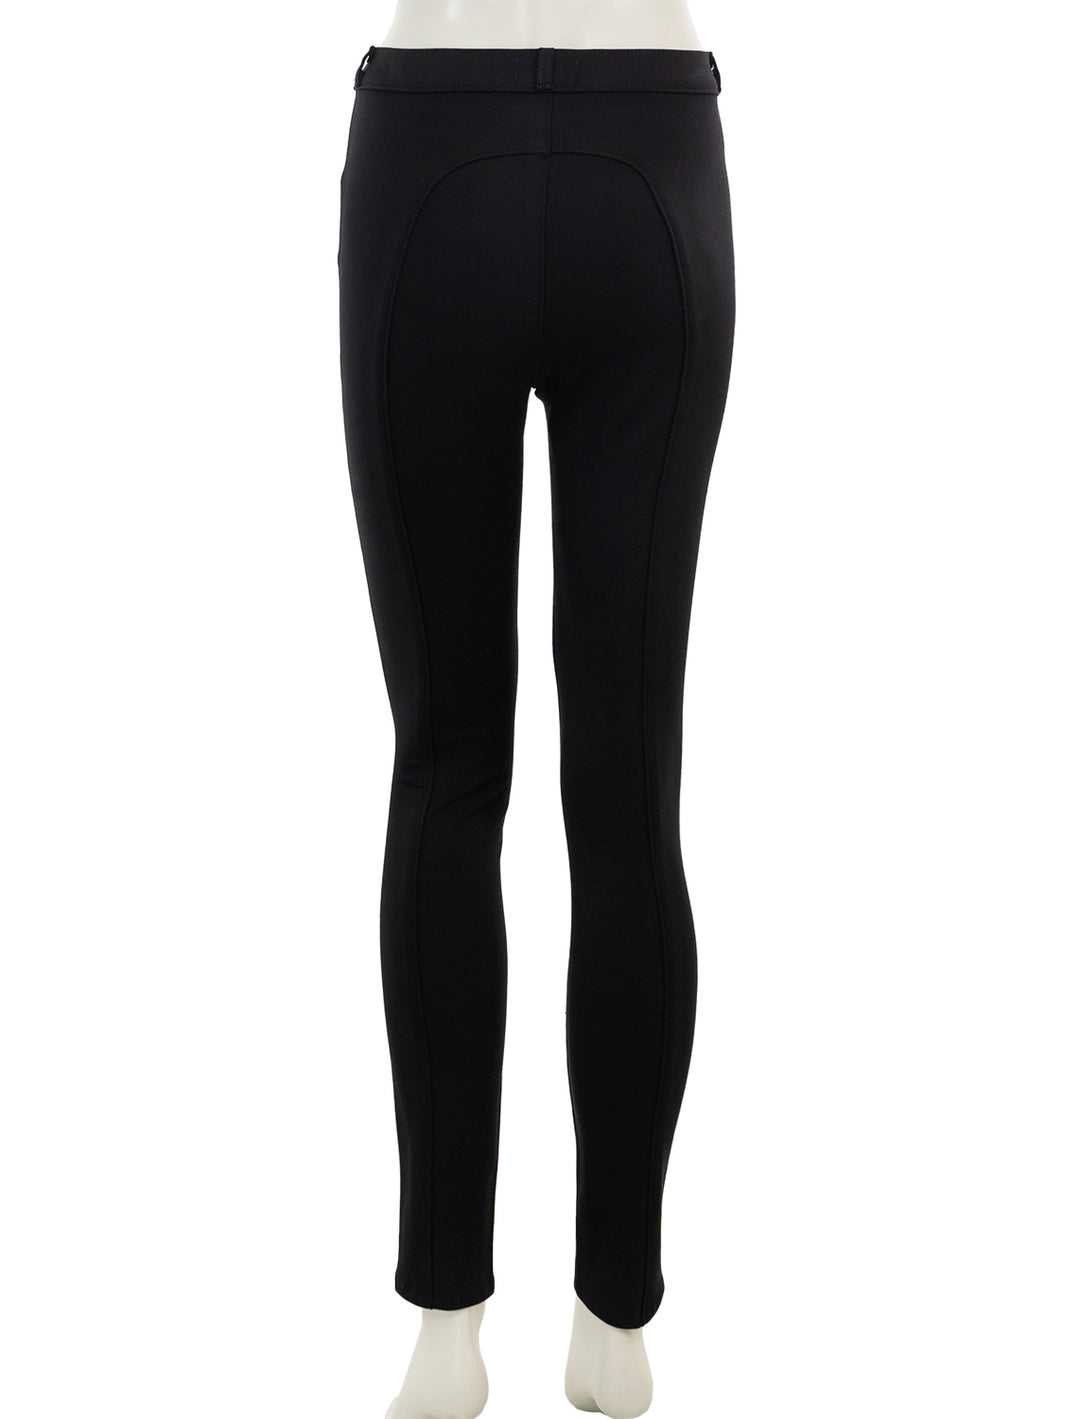 Back view of L'agence's asher high rise seamed skinny pant in black.